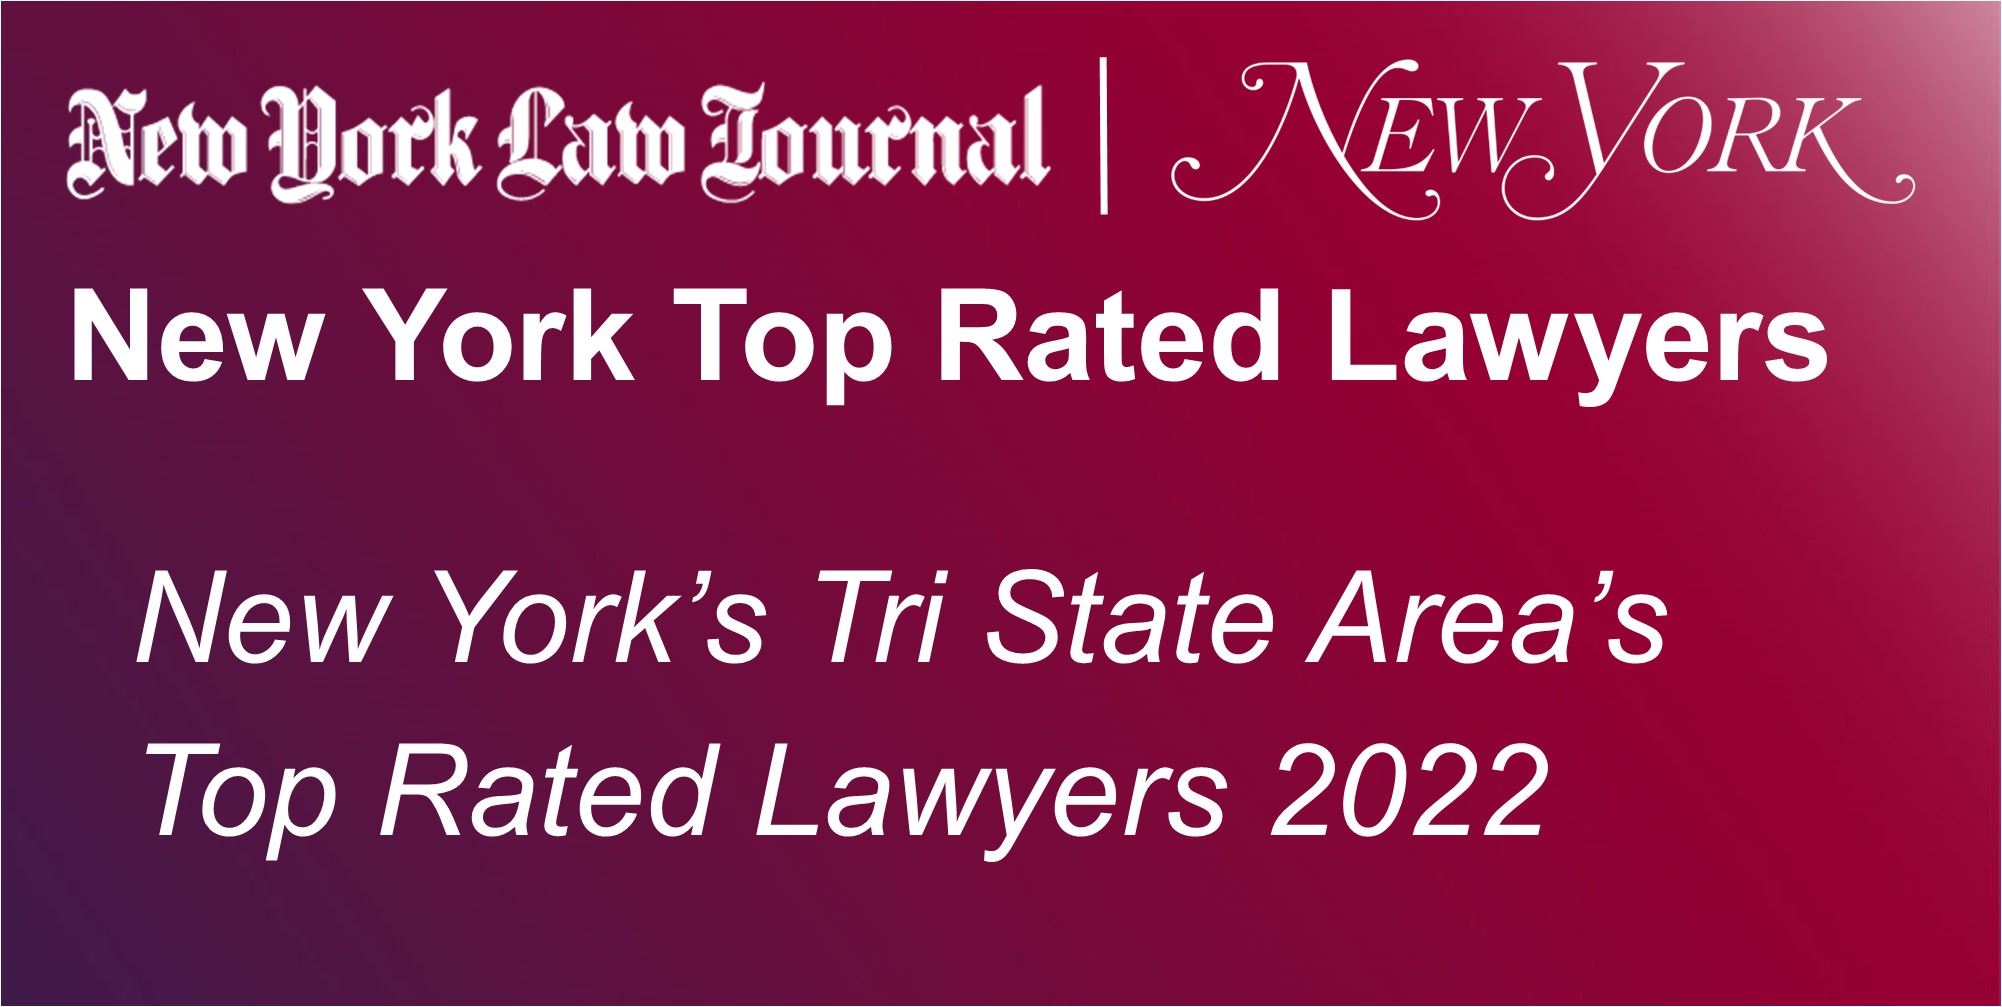 NY Top Rated Lawyers